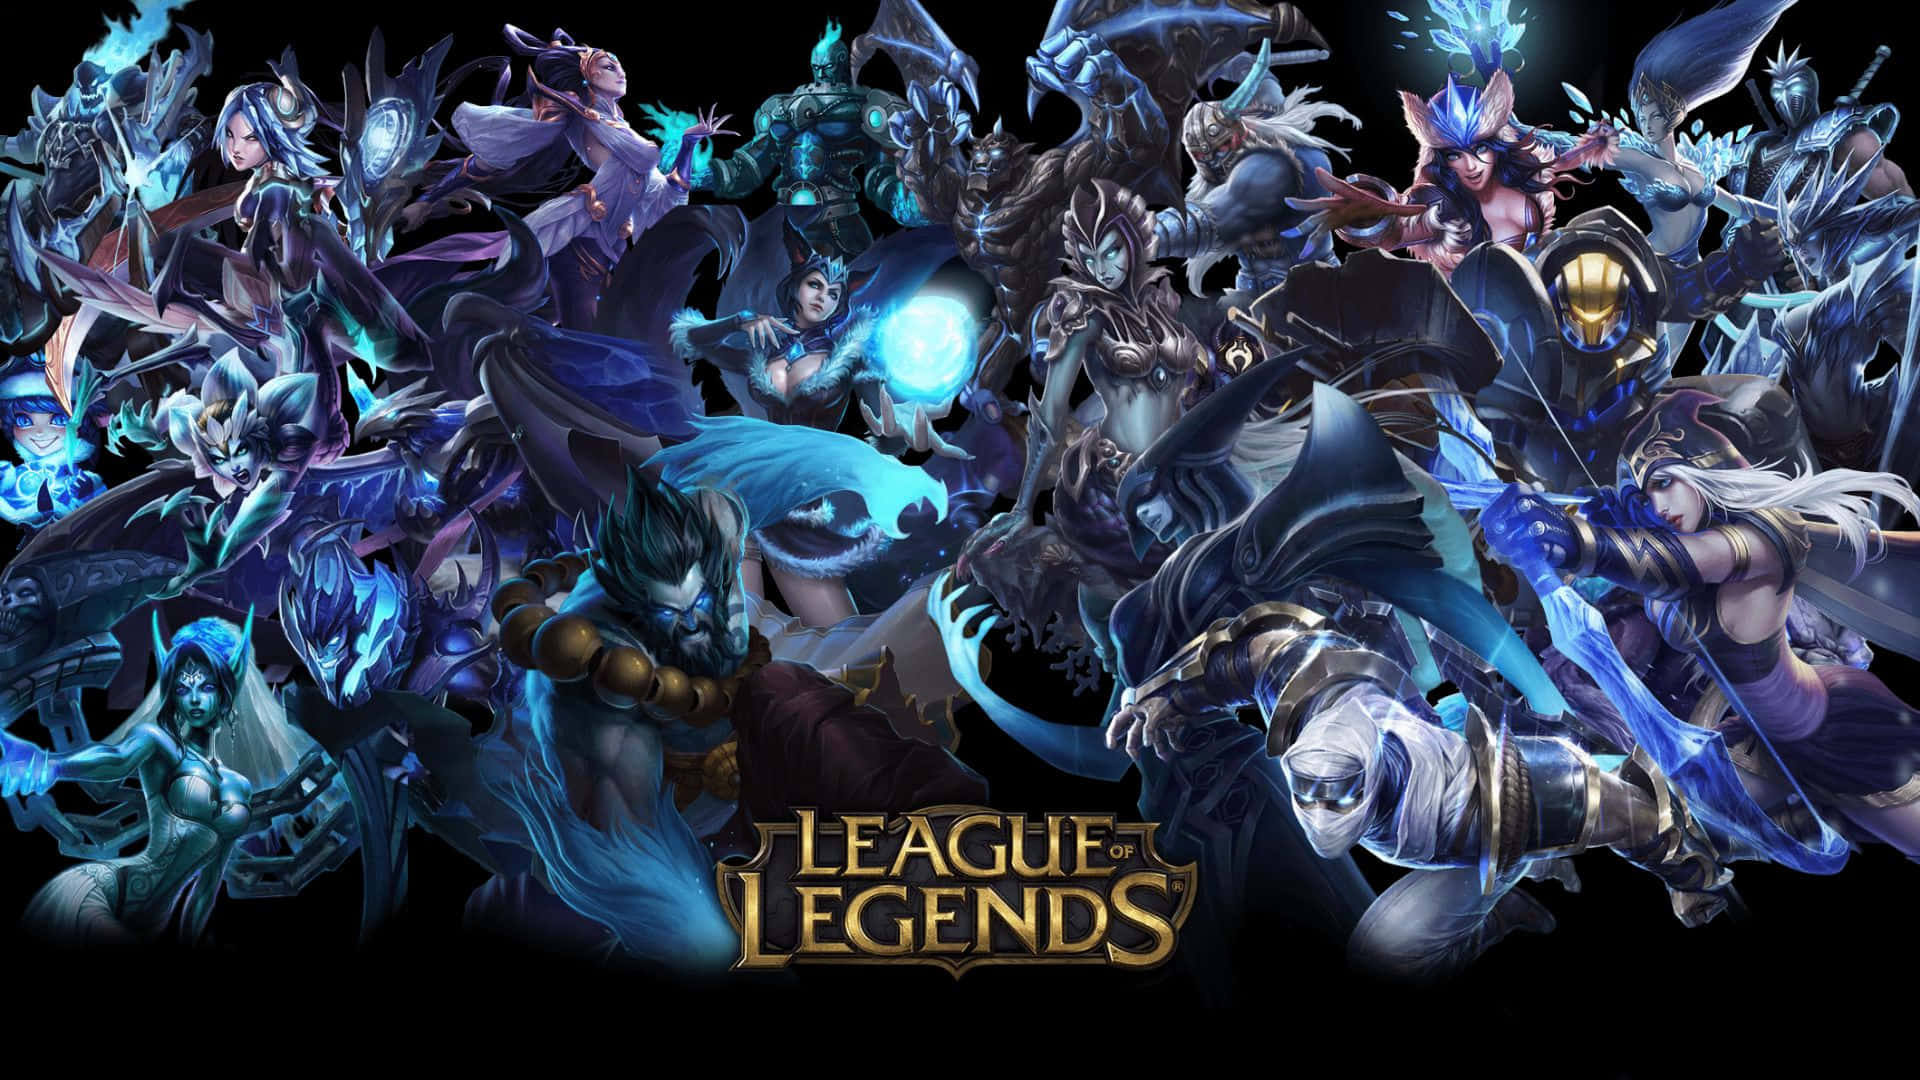 Image  Underneath a Full Moon, Characters from League of Legends Battle it Out